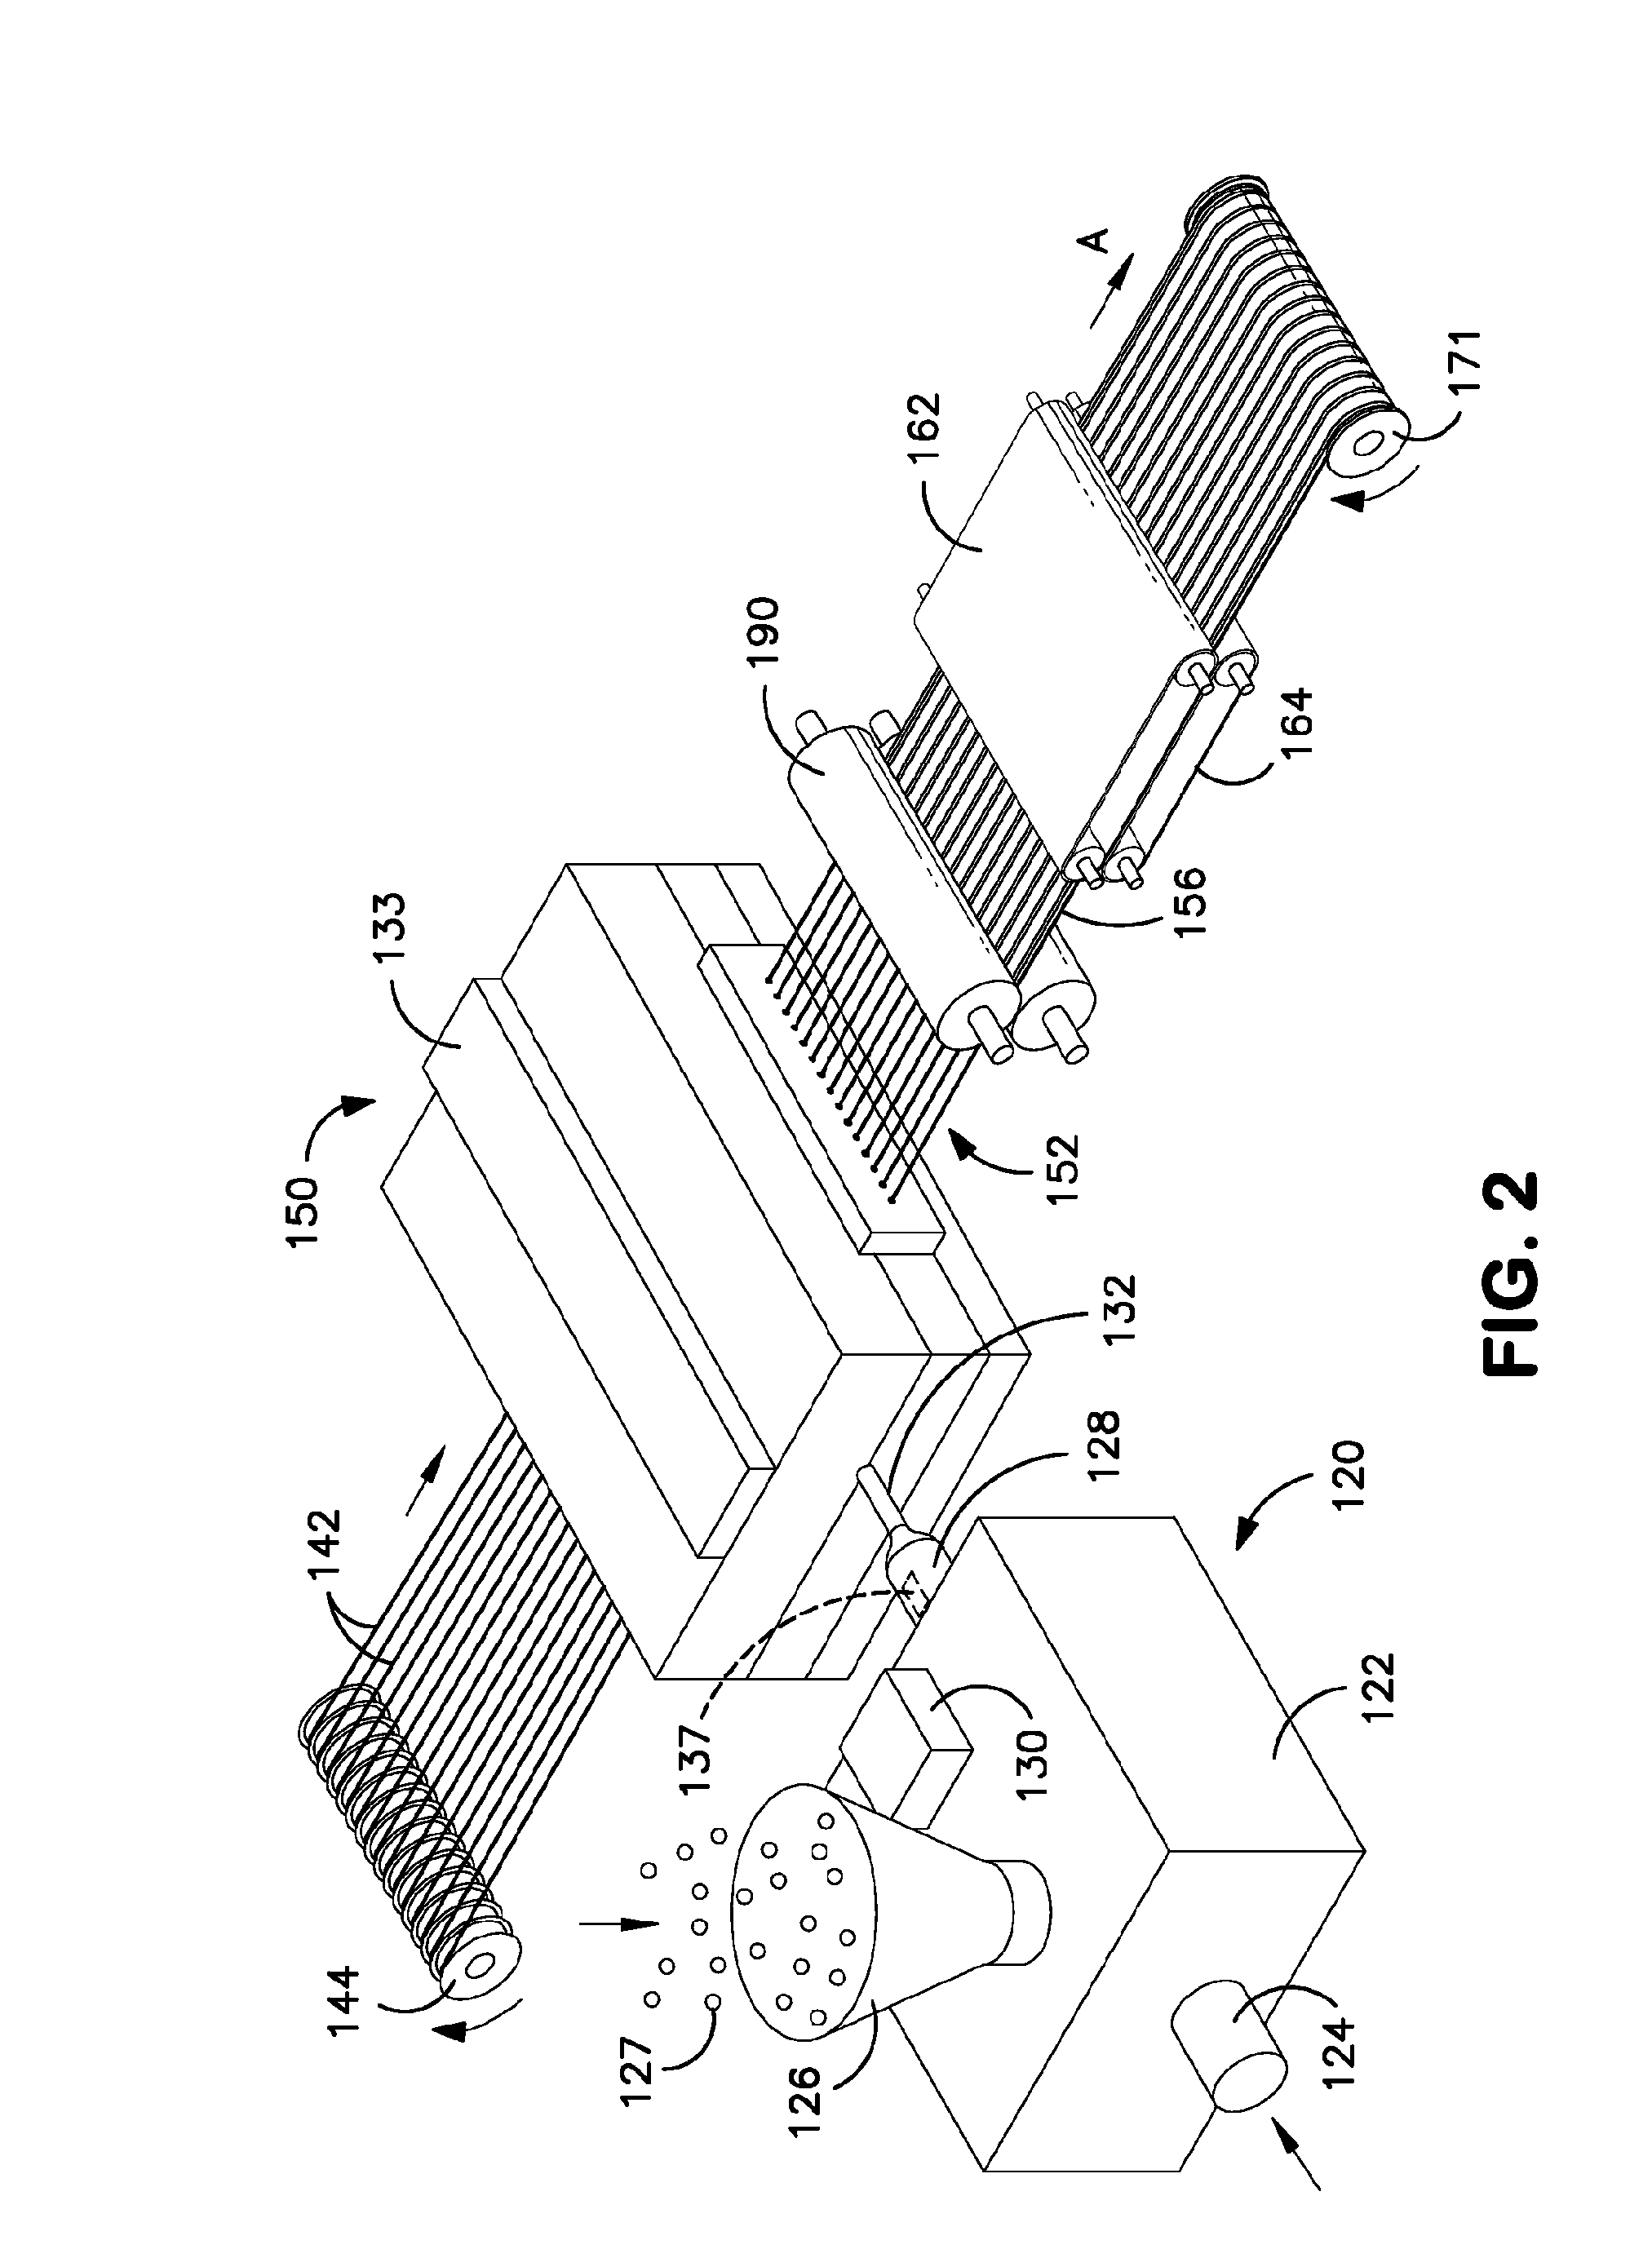 Method for Forming Reinfoced Pultruded Profiles